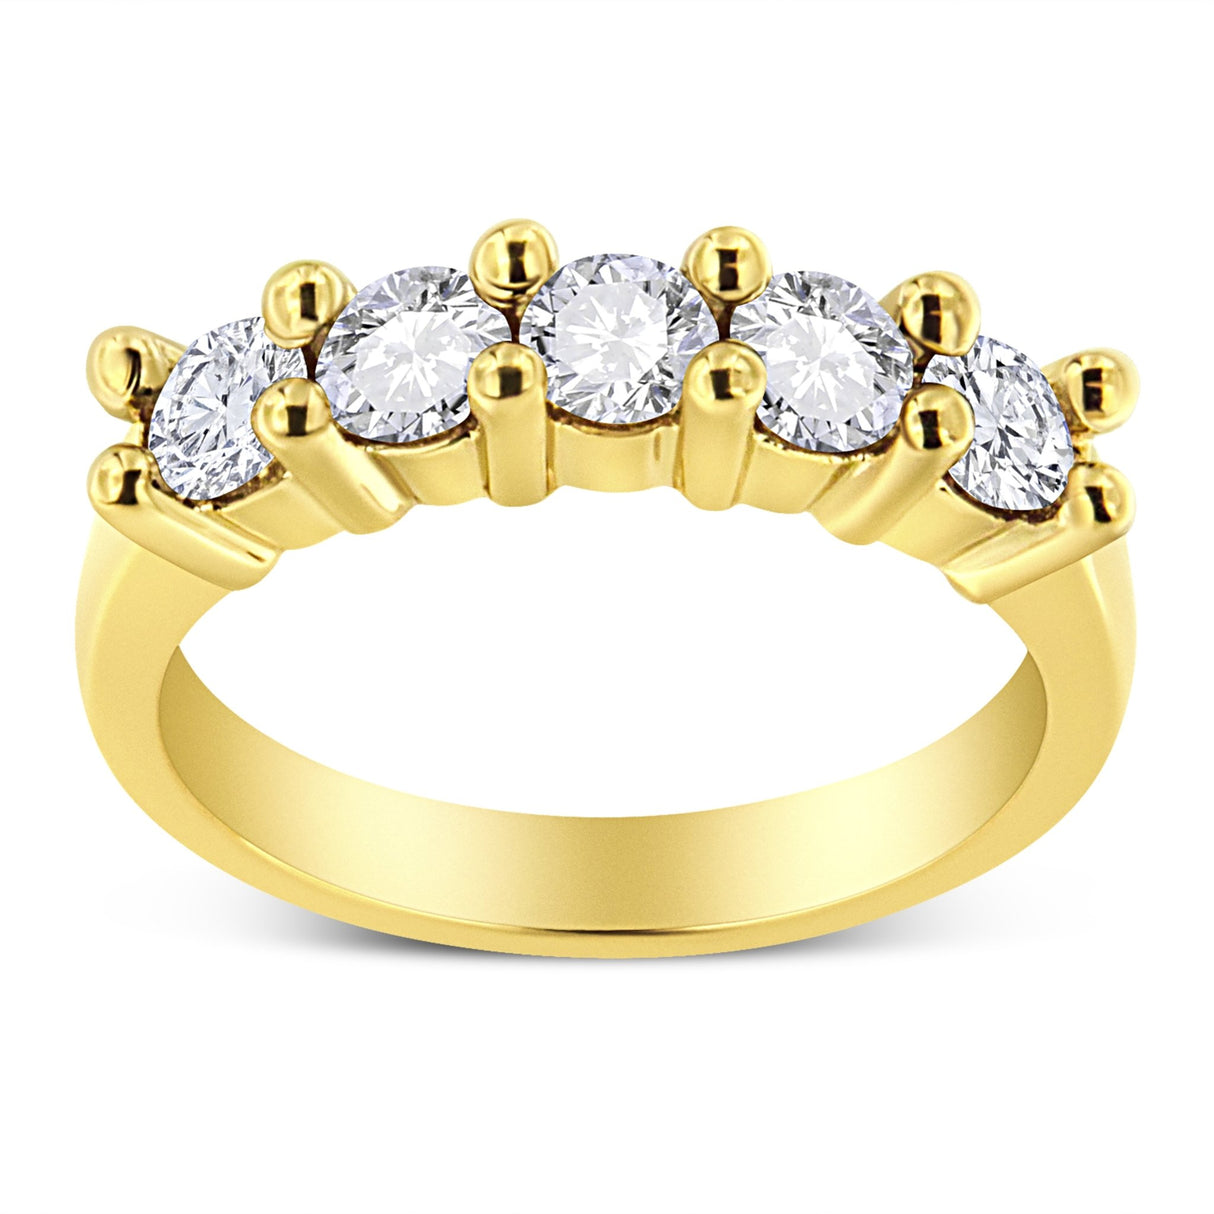 14K Yellow Gold Plated .925 Sterling Silver 1.0 Cttw Shared Prong-Set Round Diamond 5 Stone Band Ring (J-K Color, I1-I2 Clarity) - Size 6 - Tuesday Morning-Rings